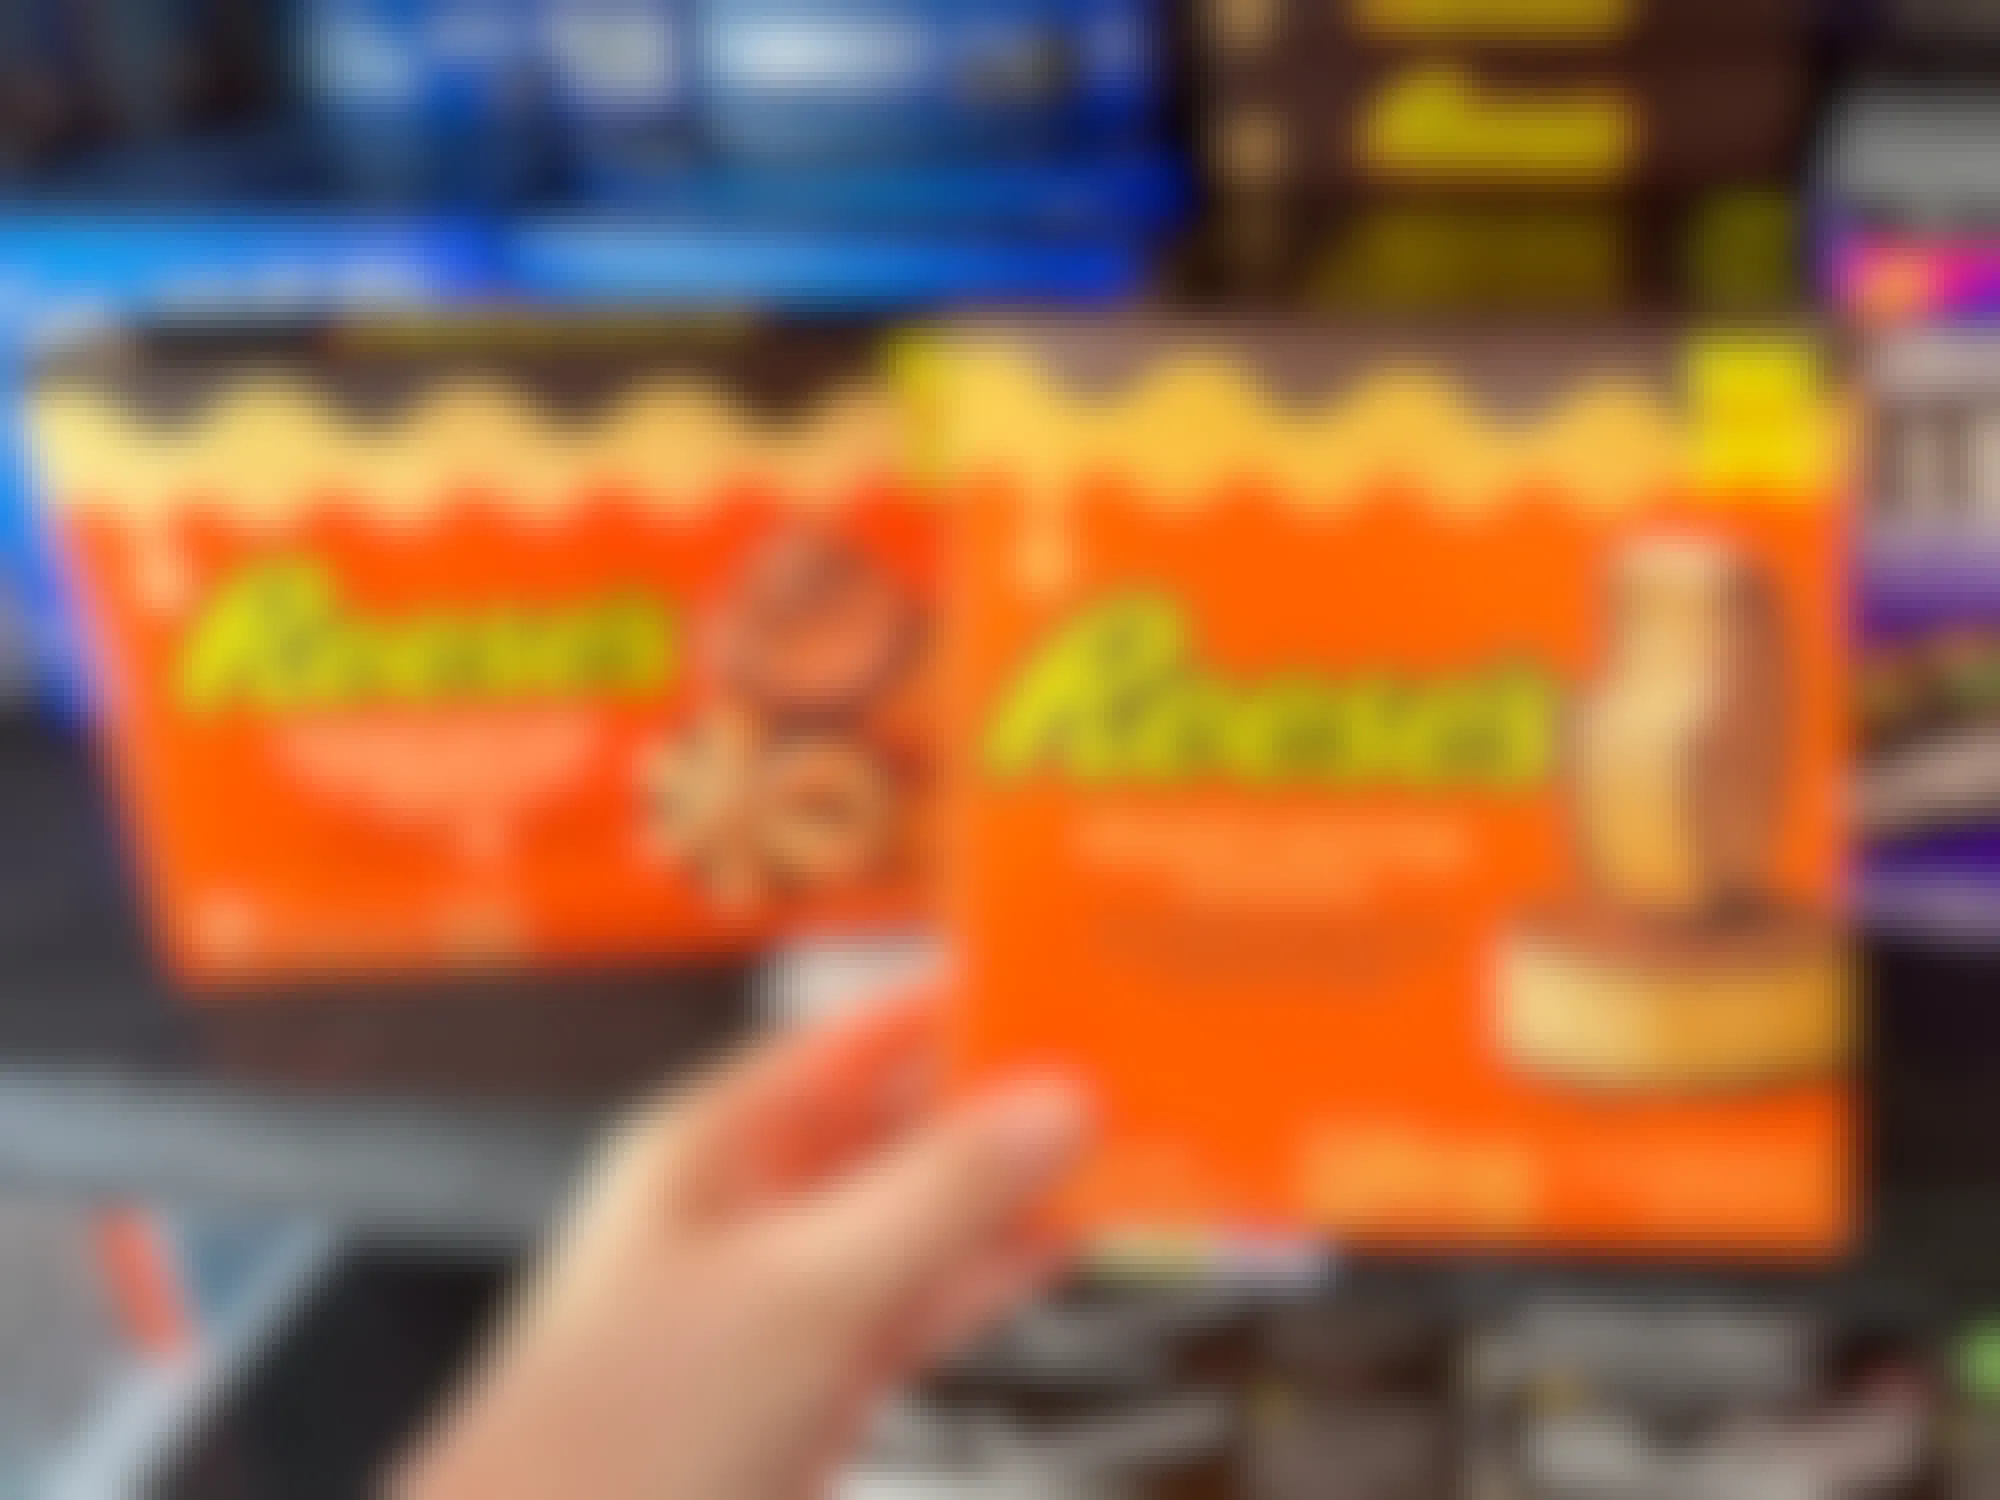 Someone holding a box of Reese's Peanut Butter ice cream sandwiches next to a box of Reese's Peanut Butter Chocolate ice cream cones